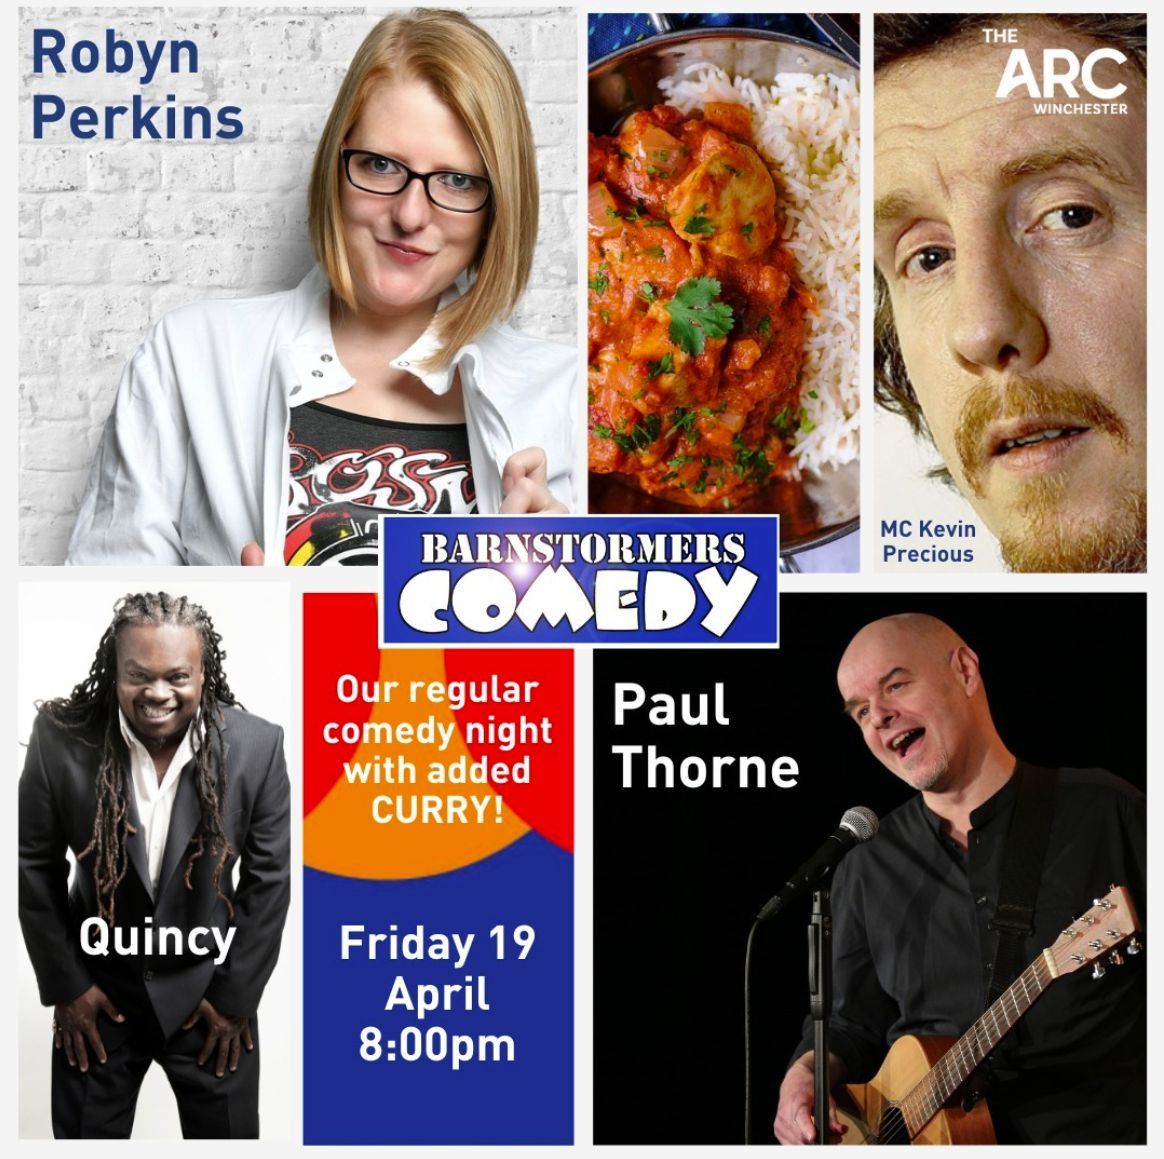 This Friday! Our regular comedy night at The Arc, Barnstormers Comedy presents a line-up of three top acts from the London comedy circuit and beyond. Line-up: @pthornecomedian , @robynHperkins and Quincy MC - Kevin Precious Tickets: buff.ly/43LpqqC